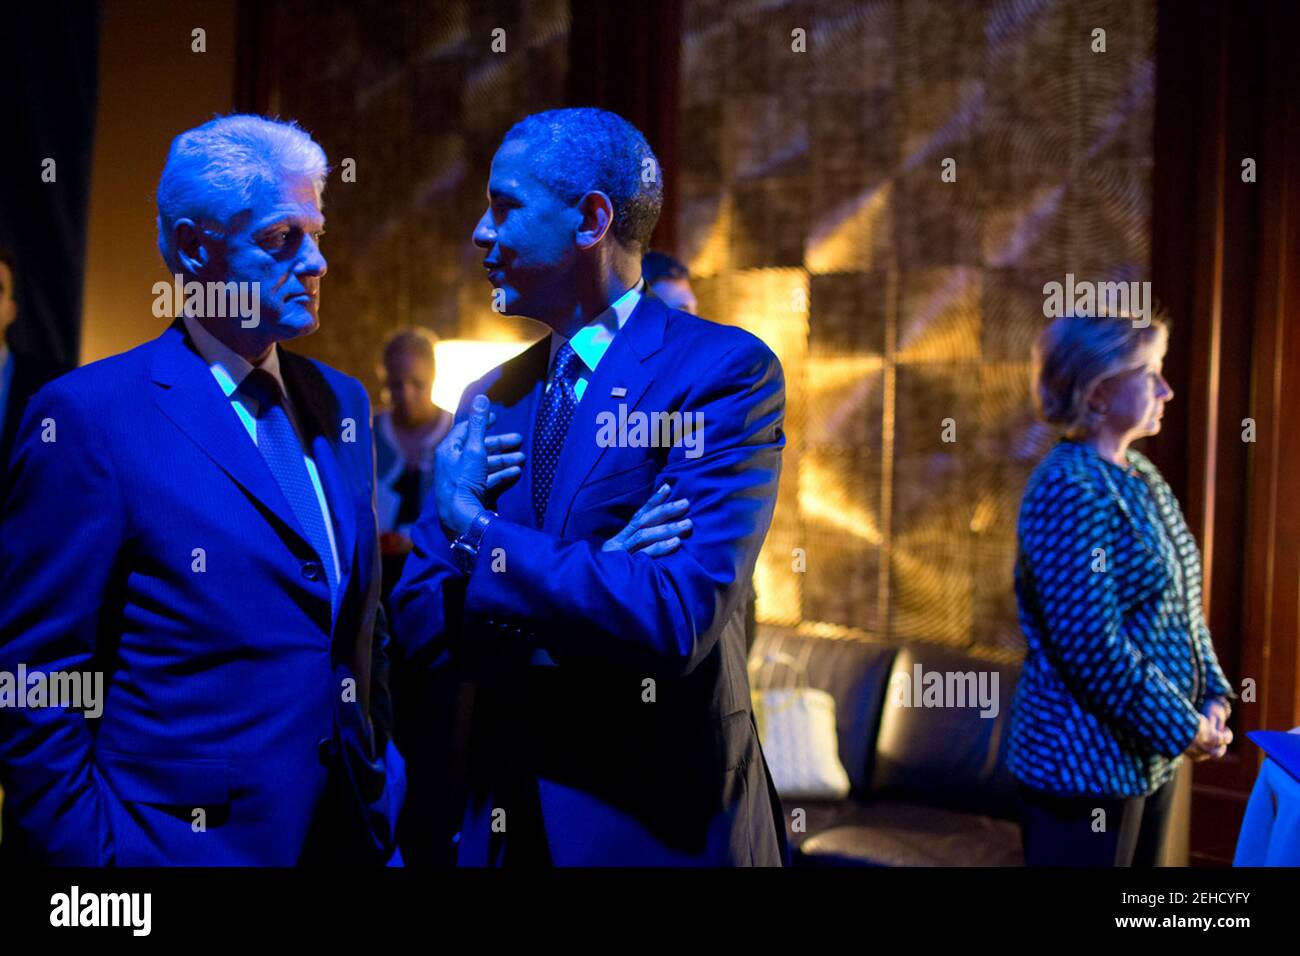 Sept. 24, 2013 'The President and former President Bill Clinton are bathed in blue light as they talk backstage prior to participating in the Clinton Global Initiative Healthcare Forum in New York City. Former Secretary of State Hillary Rodham Clinton, right, waits to introduce them.' Stock Photo